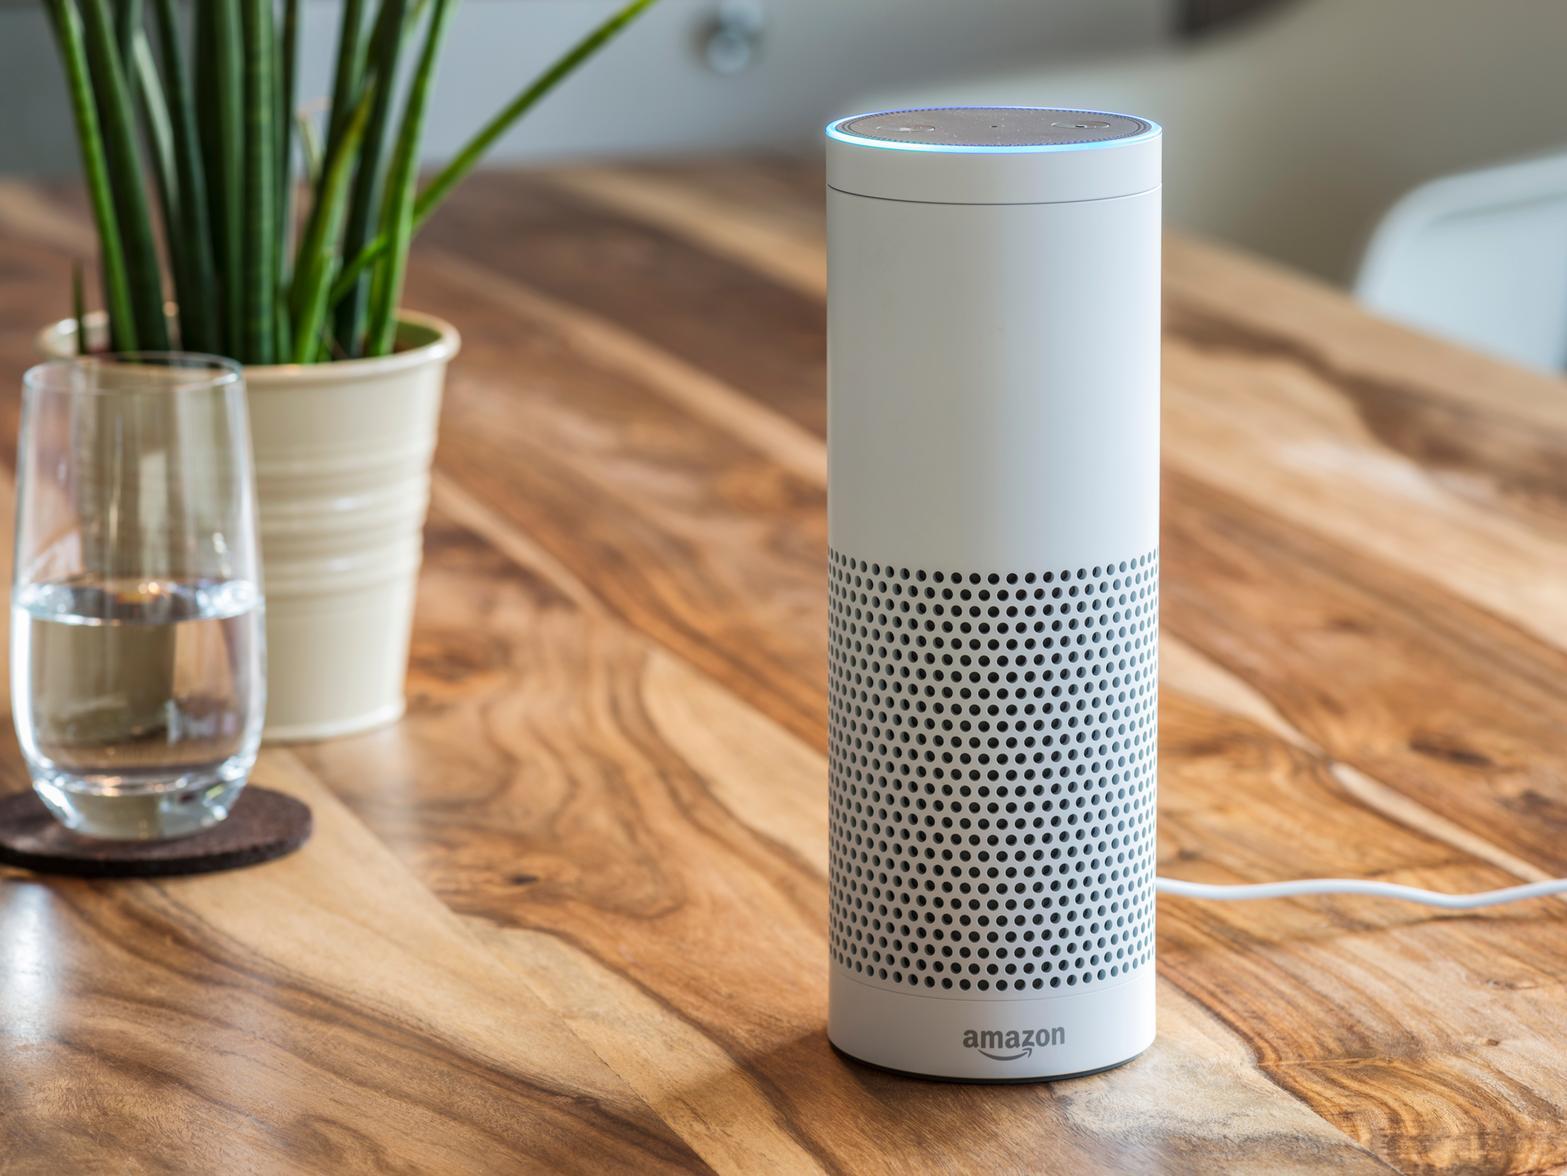 Amazon's huge Black Friday sales will include some of their own tech, like the Echo. Picture: Shutterstock